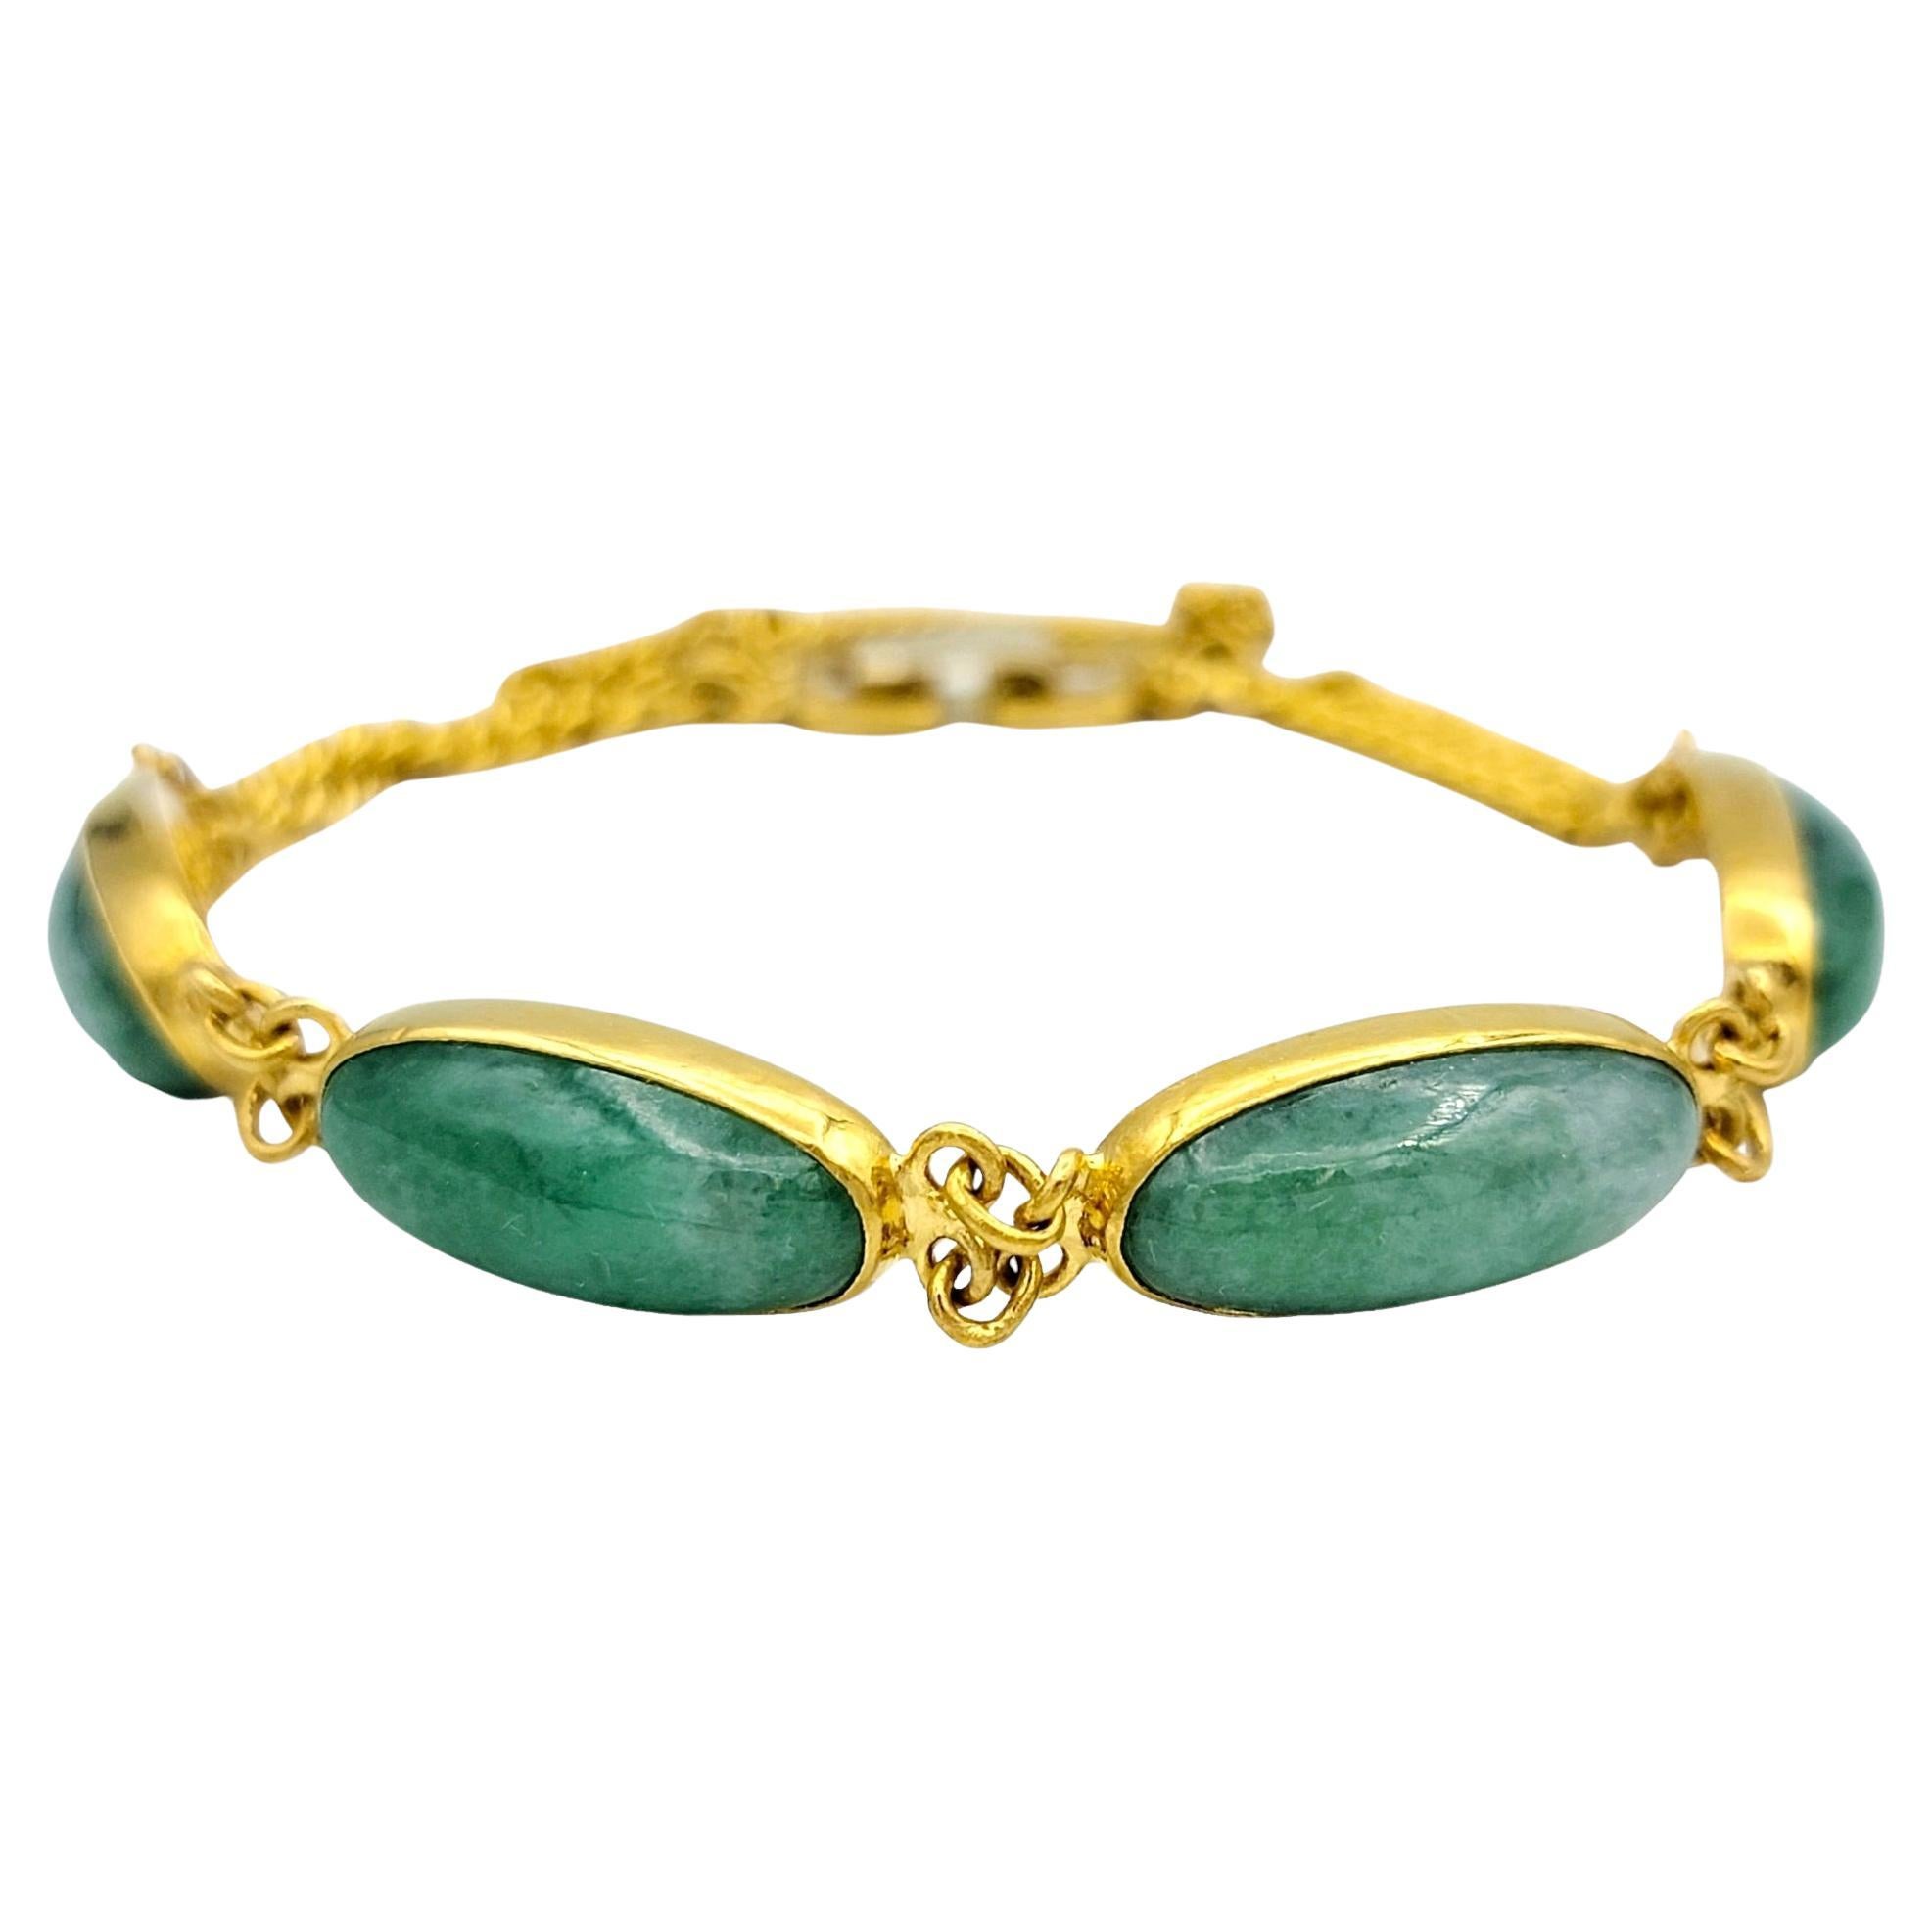 The inner circumference of this bracelet measures 6.75 inches and will comfortably fit a 6.25-6.5 inch wrist. 

Featured here is a stunning and harmonious blend of natural gemstones and gold that will elevate any fine jewelry collection. Adorning